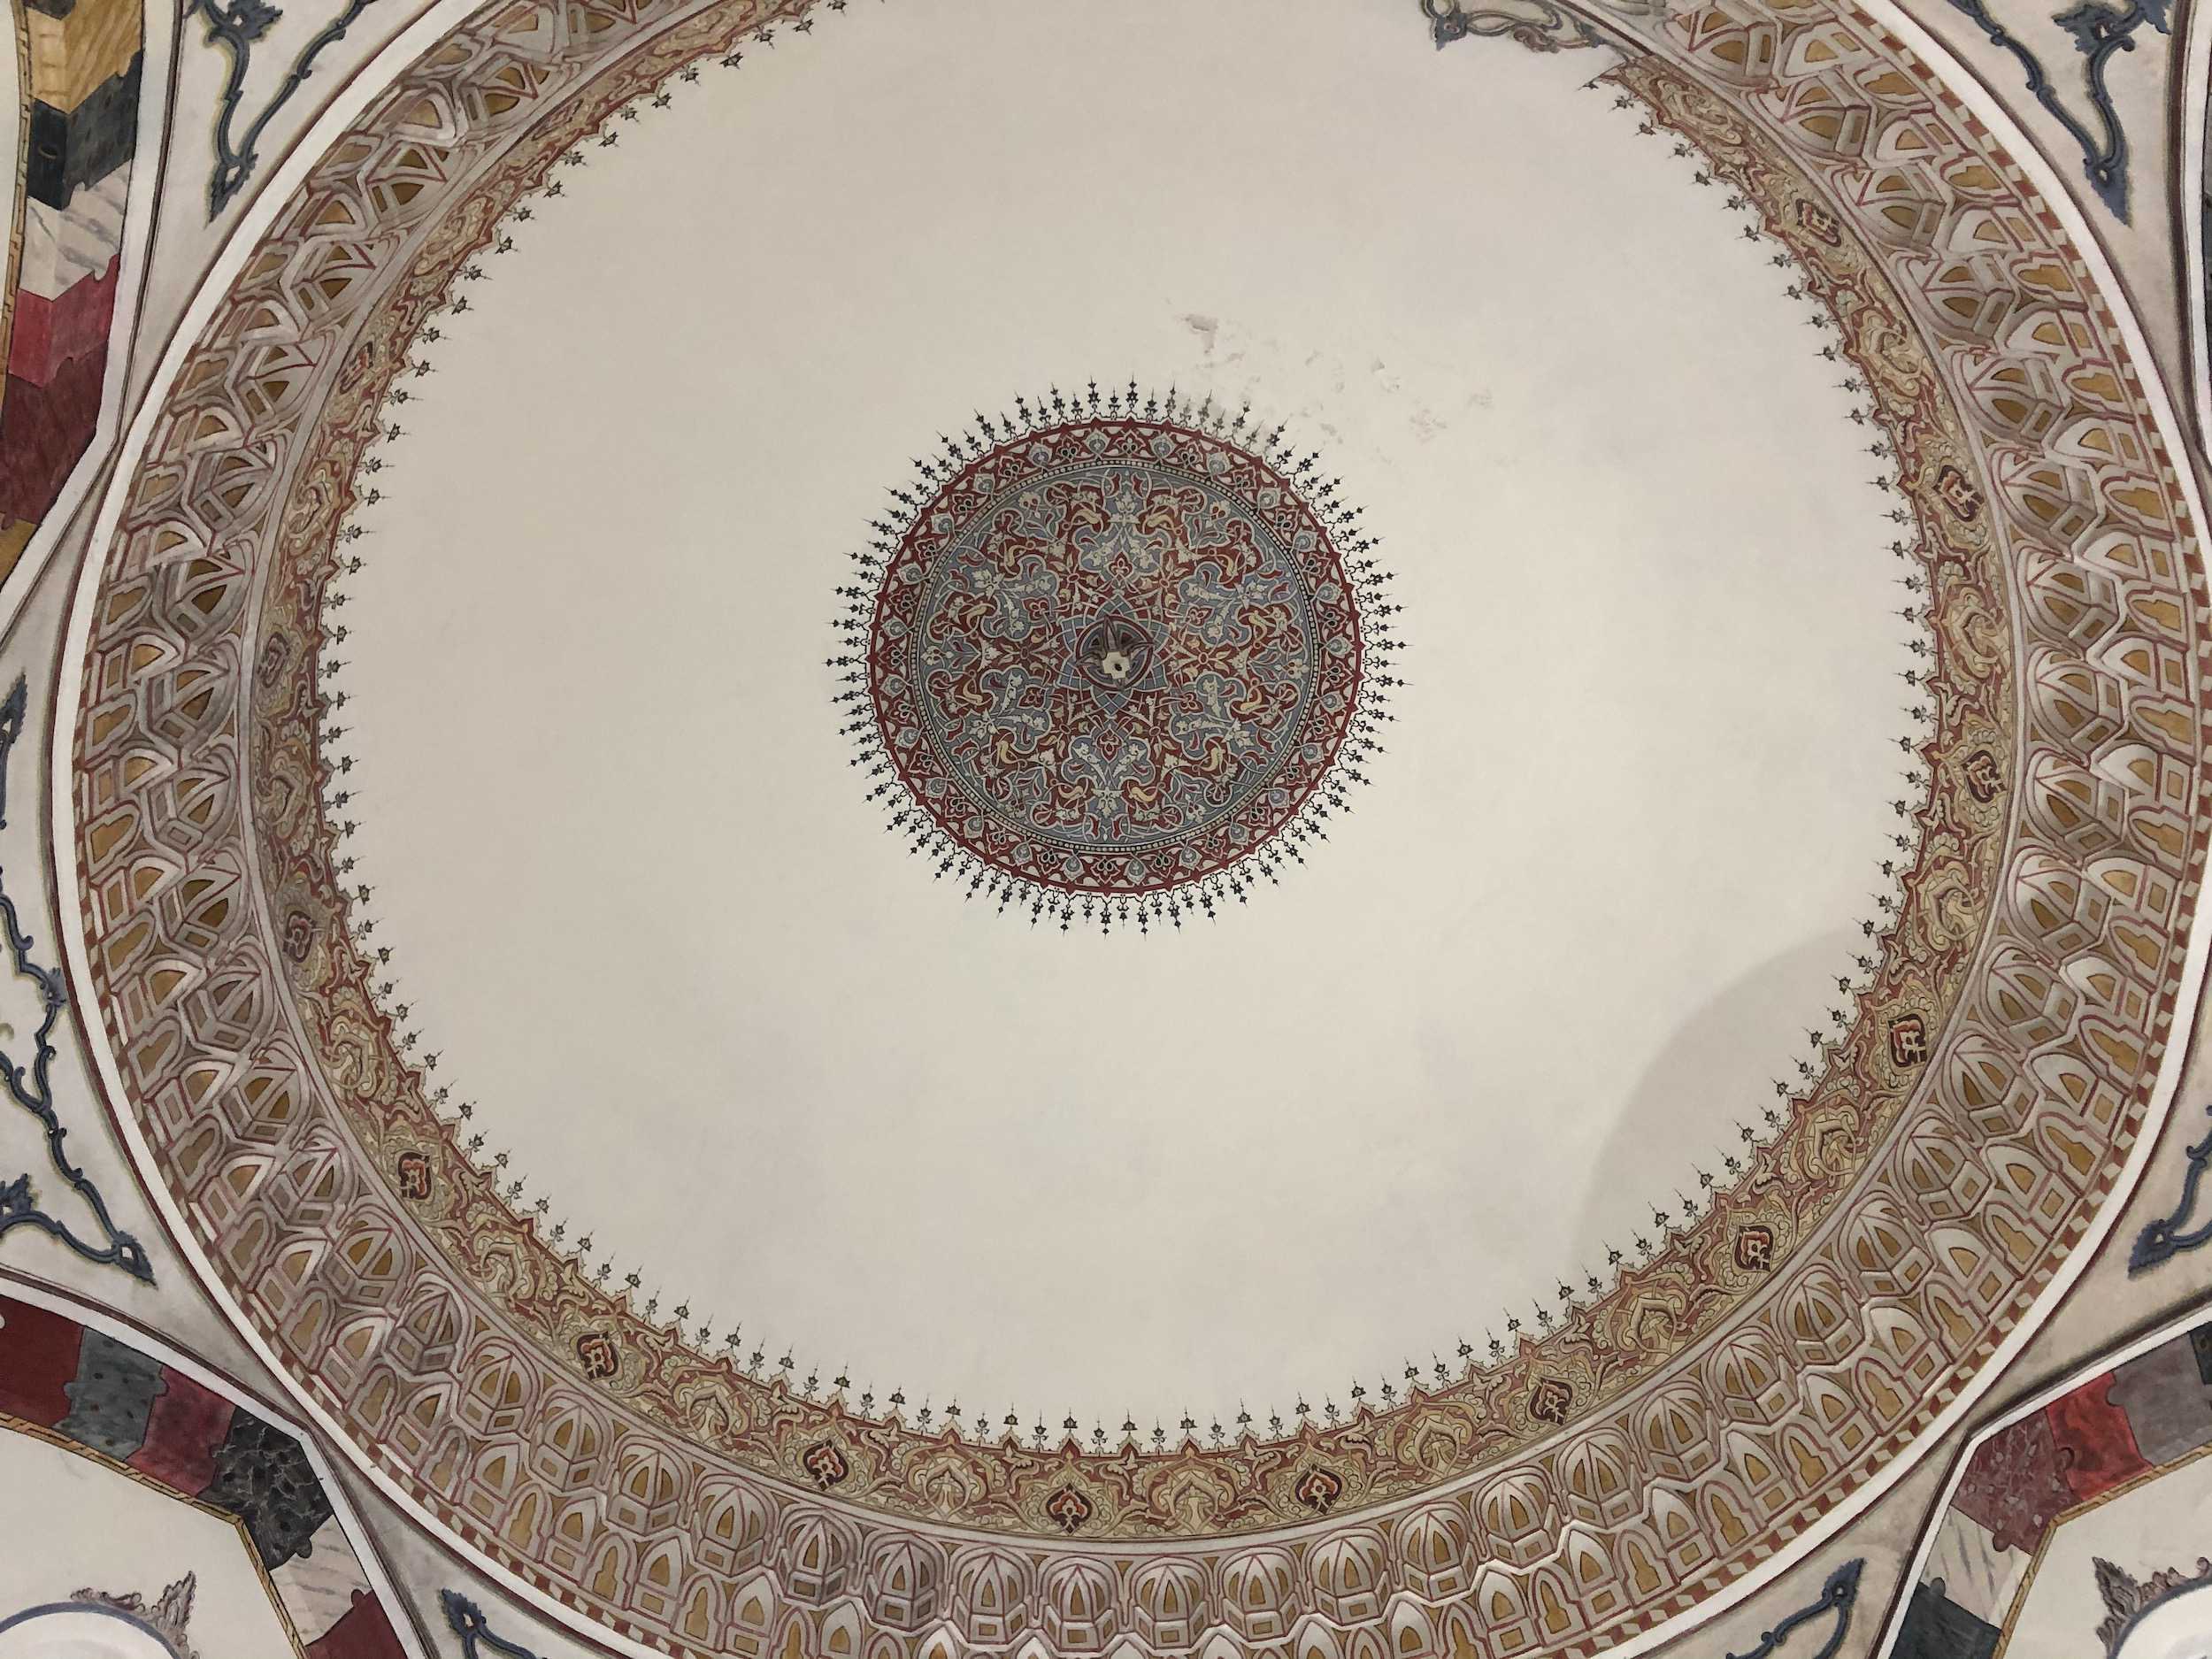 Dome of the tomb of Hüma Hatun